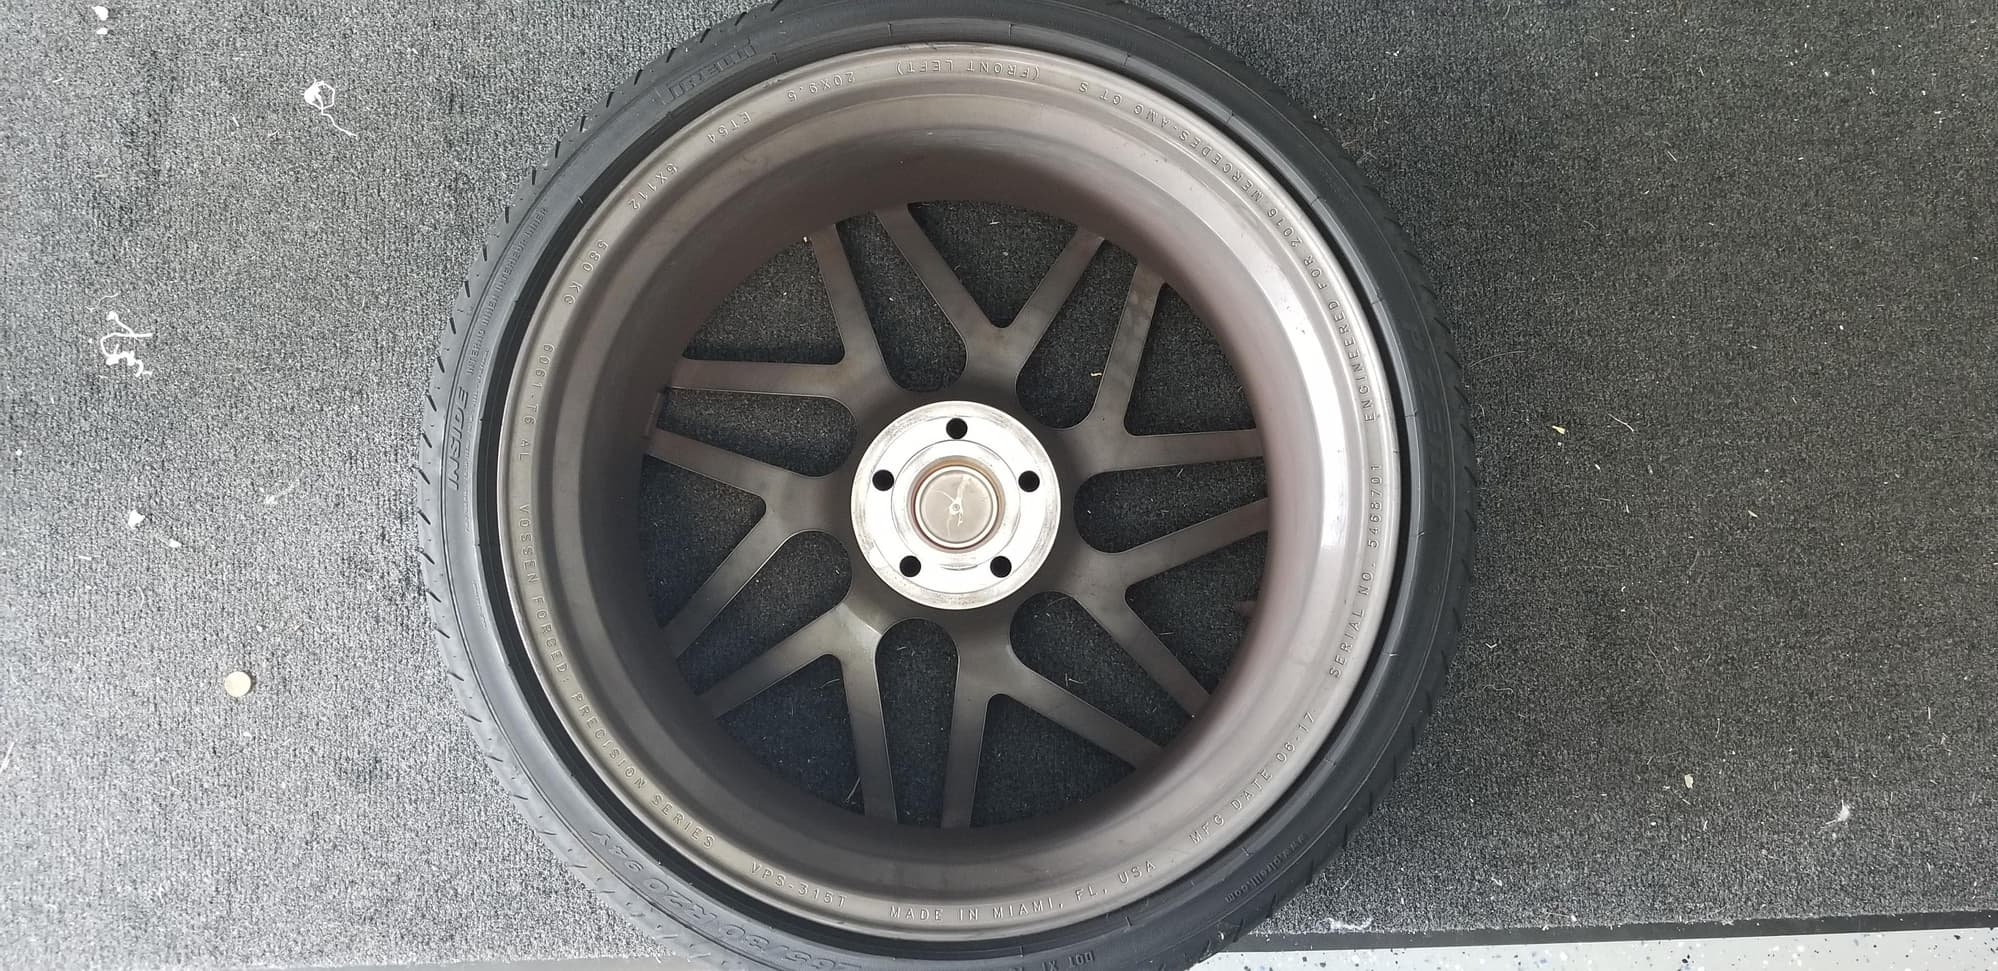 Wheels and Tires/Axles - Forged Vossen VPS-315T wheel set for Mercedes GT-S - Used - All Years Mercedes-Benz AMG GT S - Pembroke Pines, FL 33028, United States